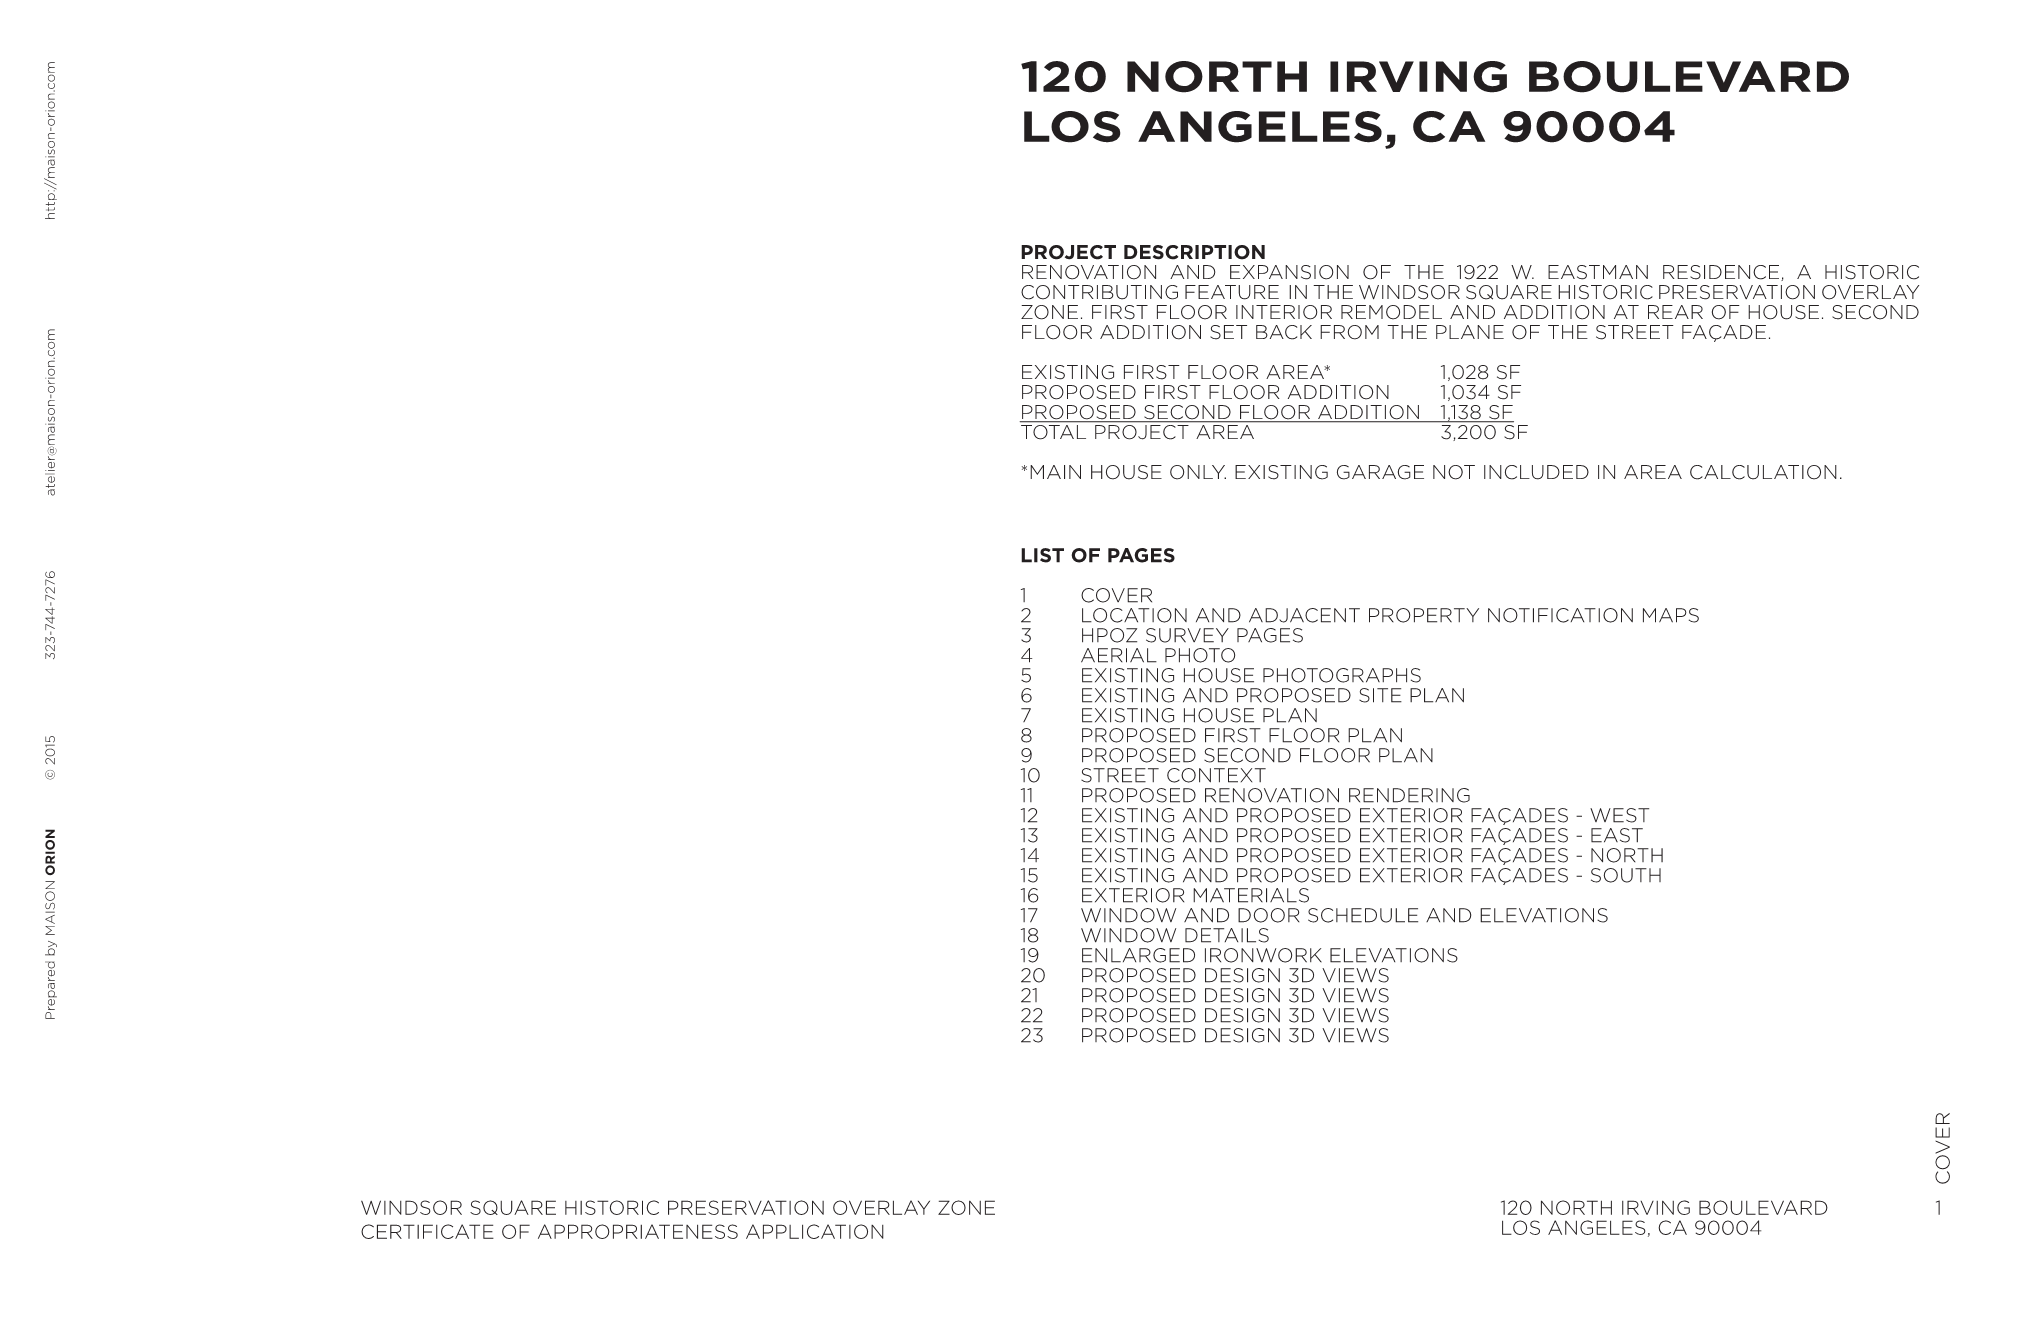 1-14-002 120 NORTH IRVING BOULEVARD - HPOZ COA APPLICATION DOCUMENTS.png